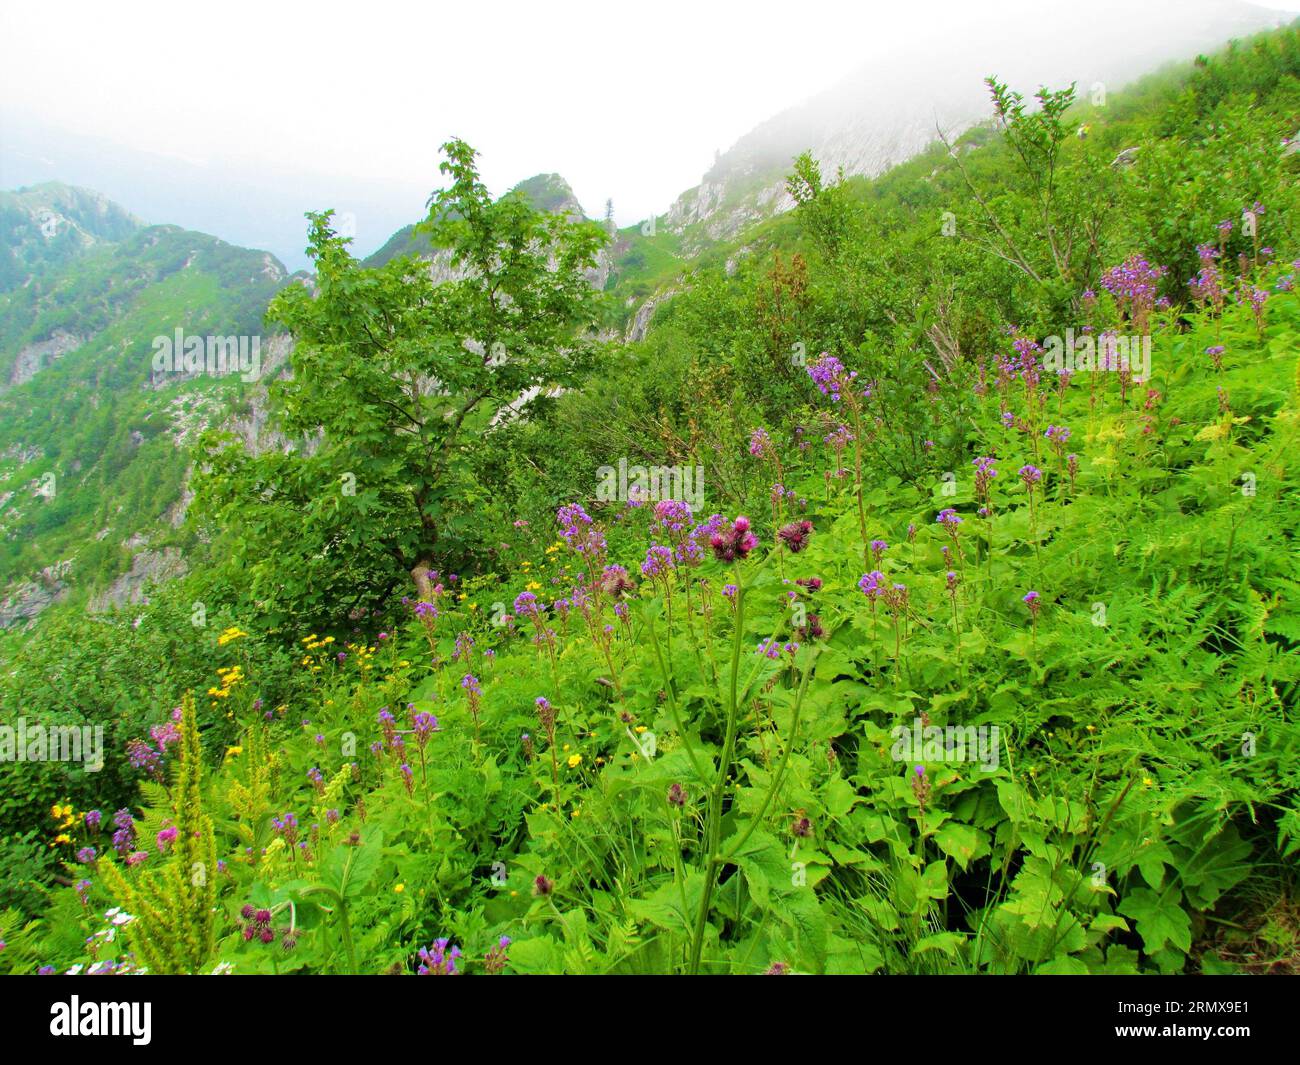 Colorful alpine meadow full of tall blooming pink alpine blue-sow-thistle (Cicerbita alpina) and yellow flowers with a mountain ridge in the back at C Stock Photo